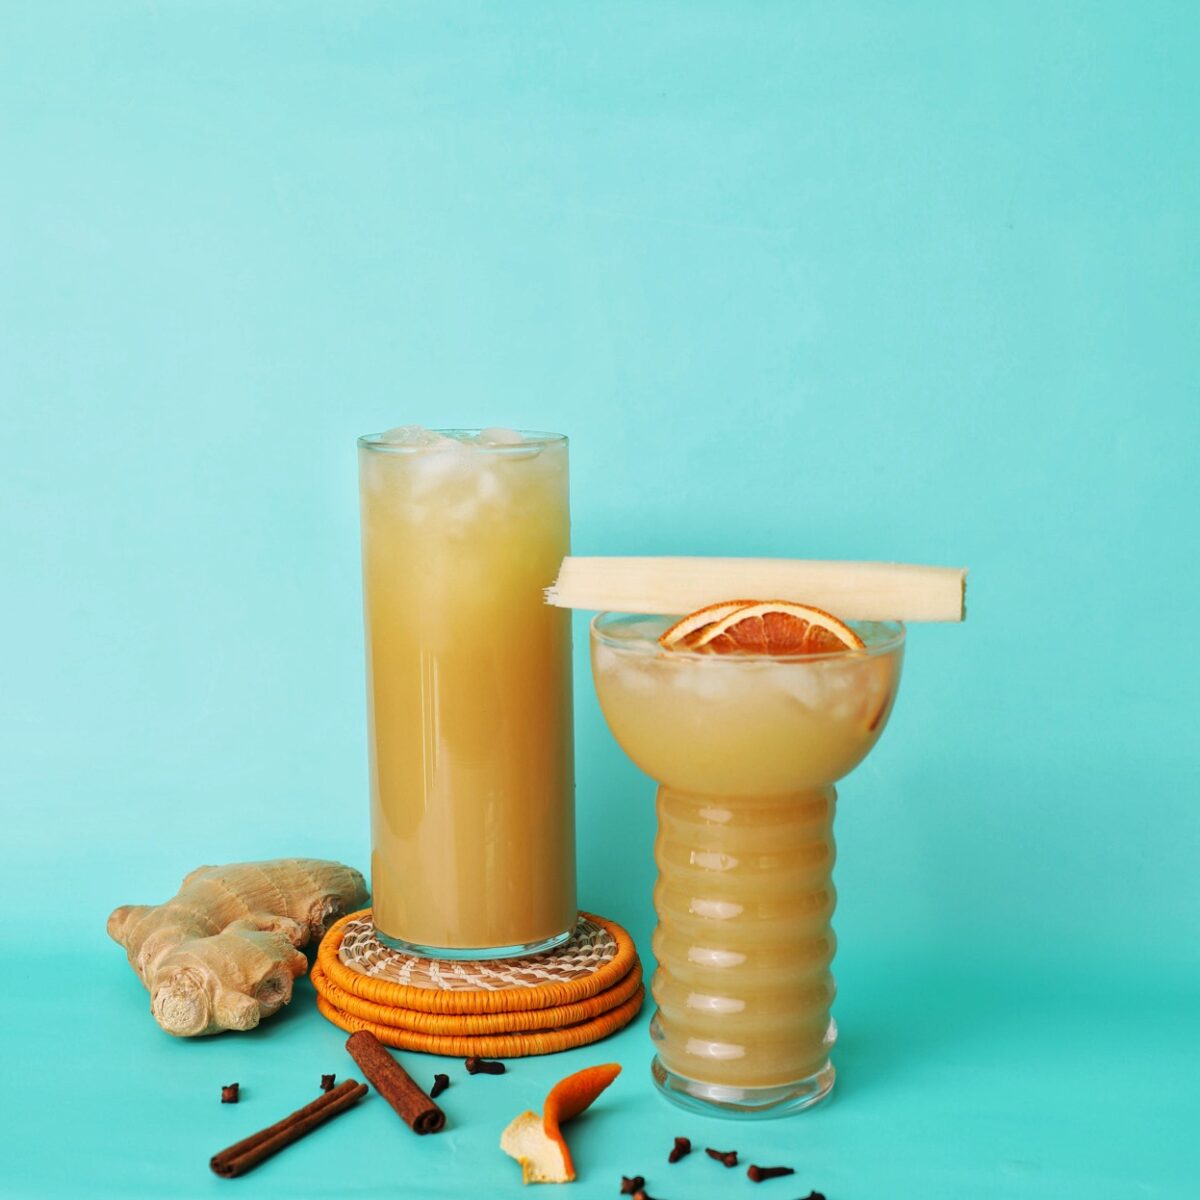 two glasses of ginger beer on a teal black ground. One glass is sitting on a stack of orange coasters. The other glass is topped with a piece of sugar cane, 